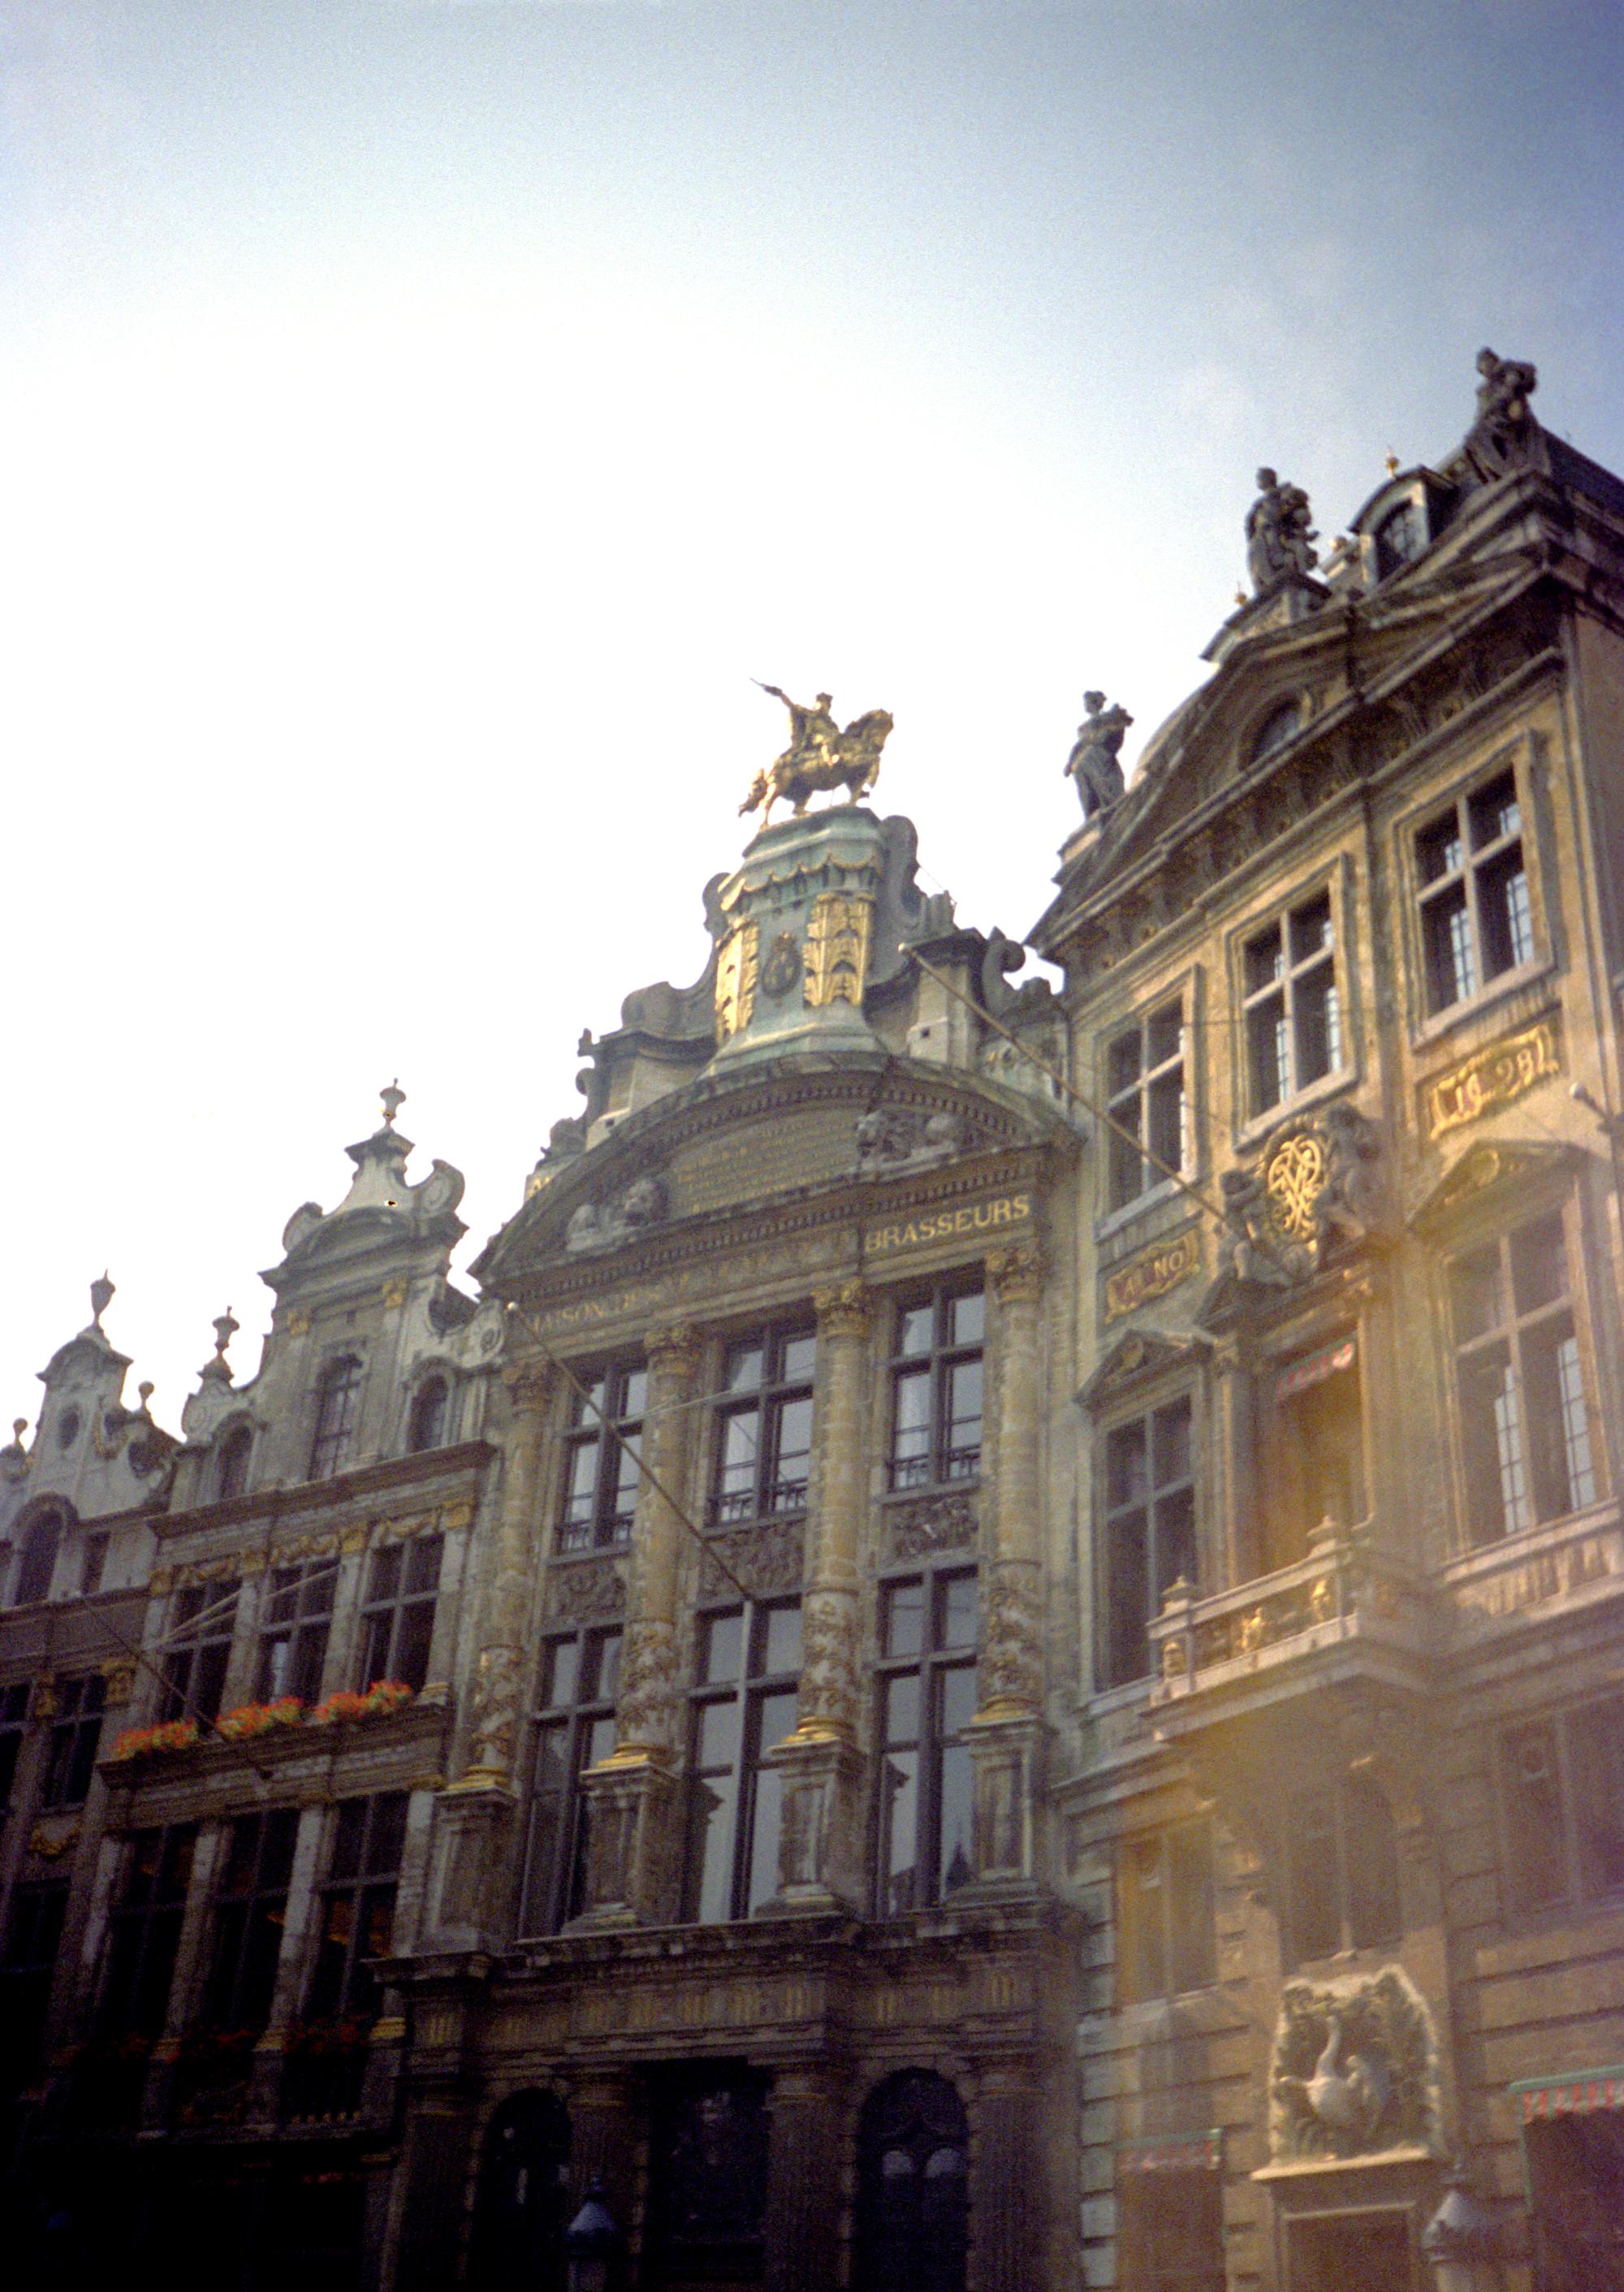 Benelux (Ana) - Brussels #2